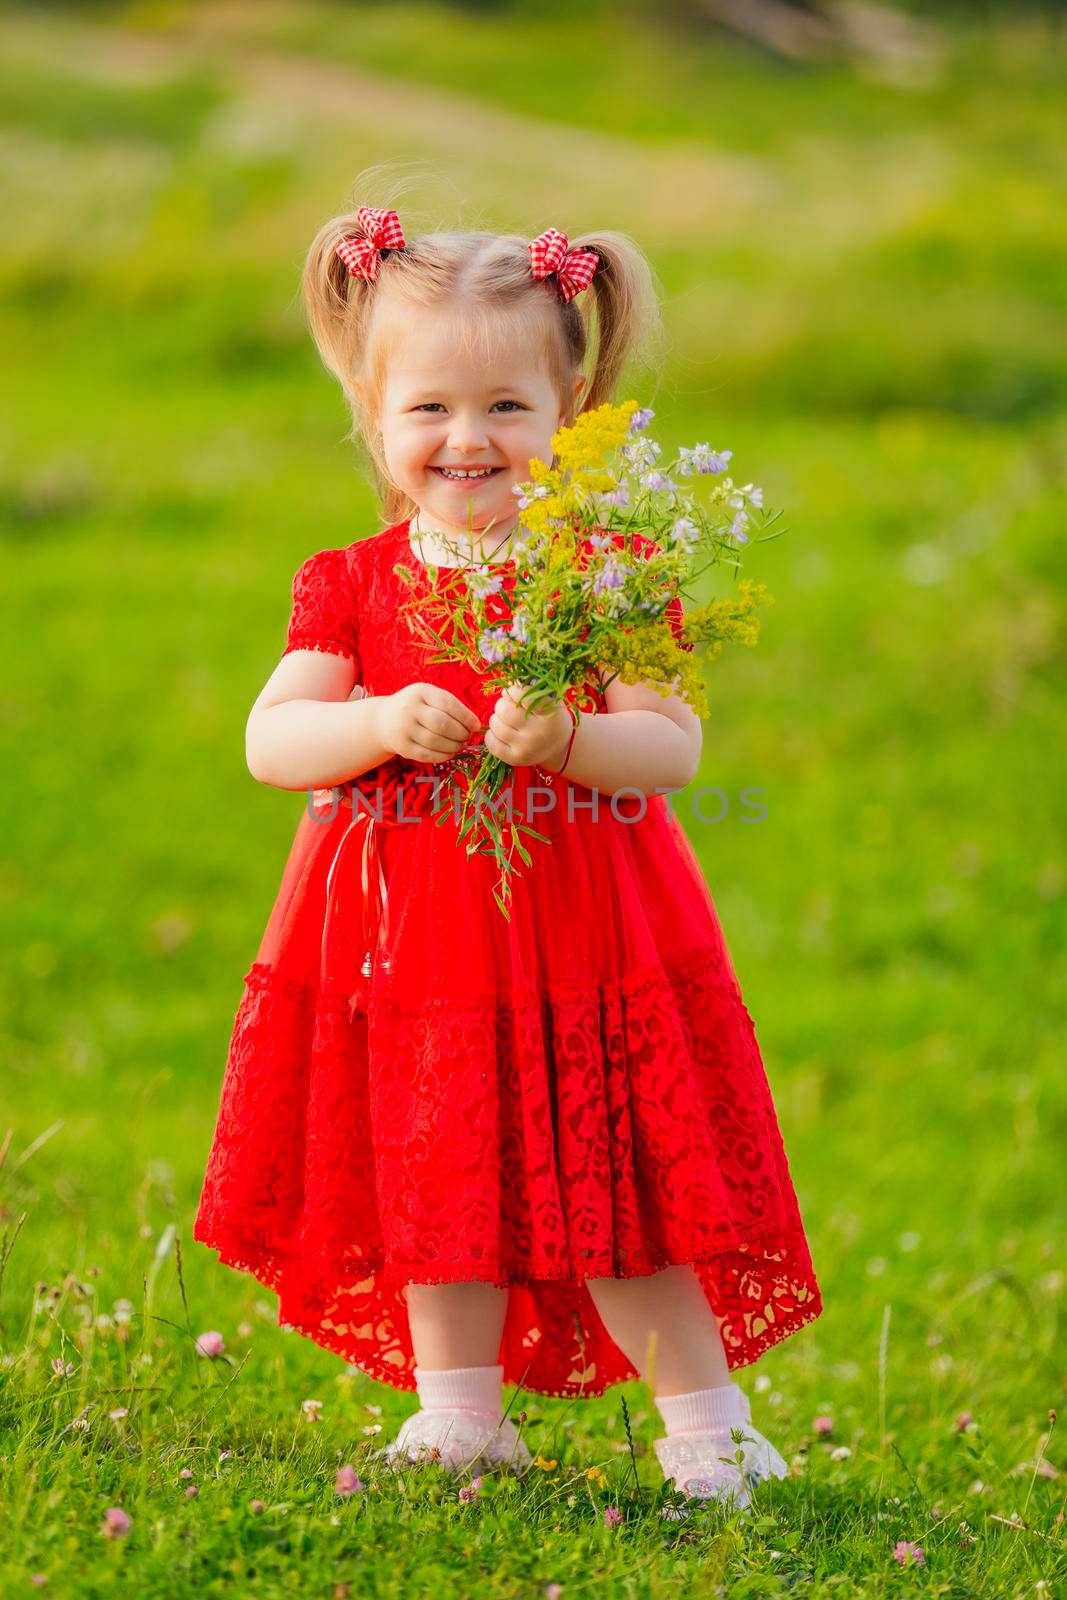 girl in a red dress and with a bouquet of wild flowers on the lawn